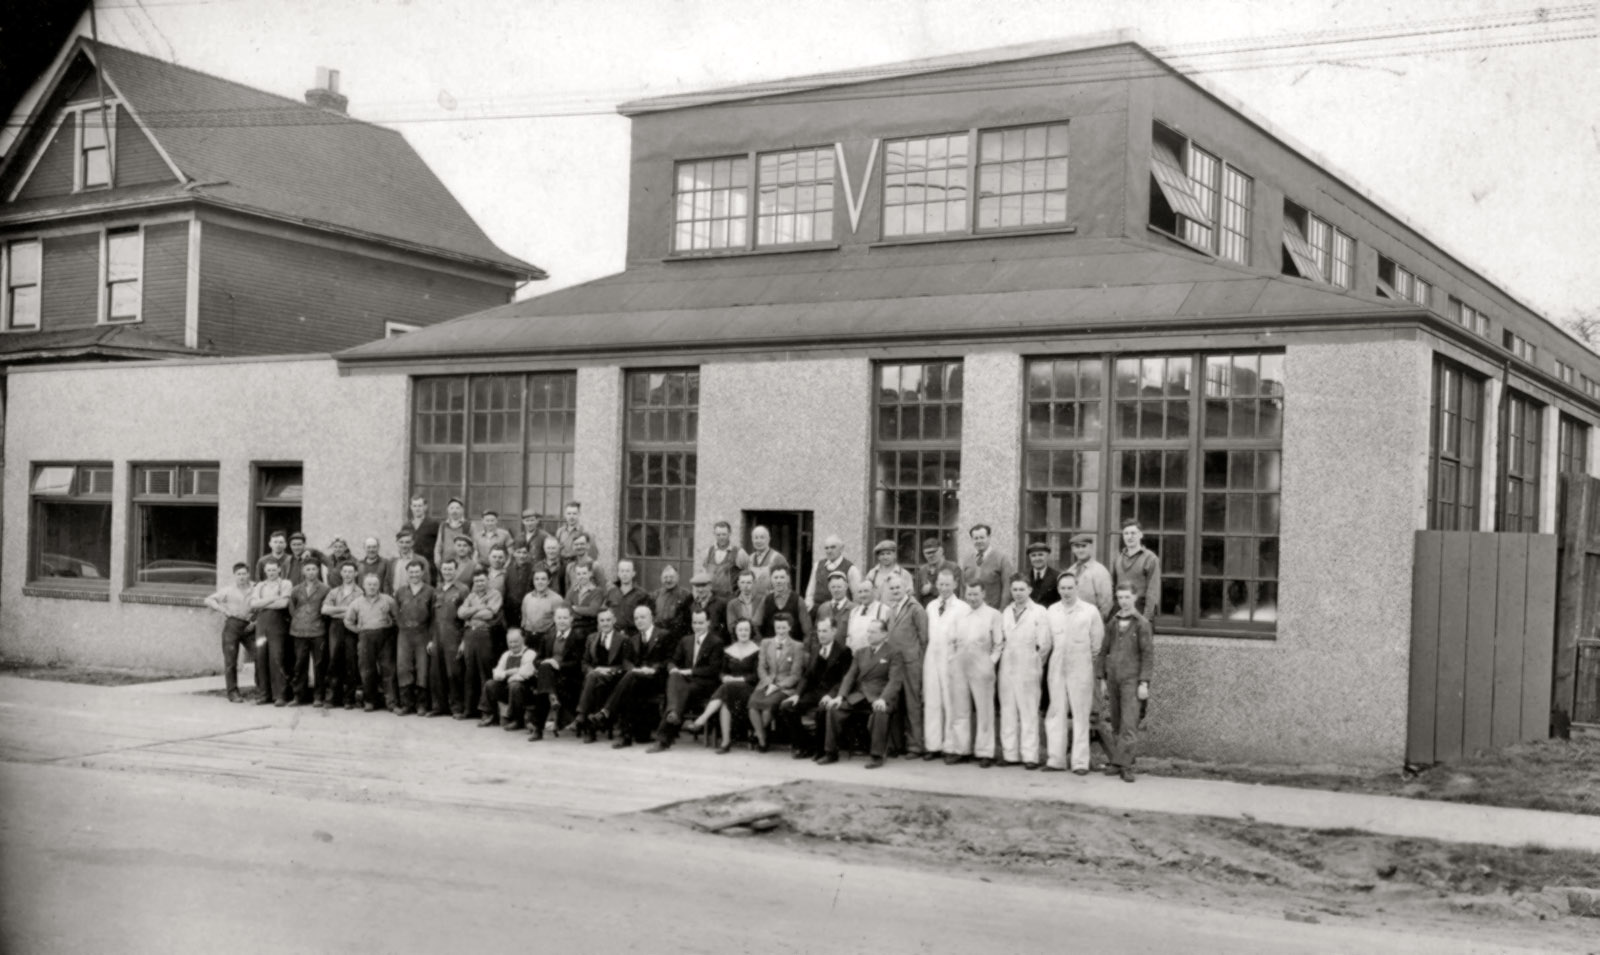 This is A-1 Steel in Vancouver B.C. mid to late 40's. My Grandfather was a pioneer of the steel industry and this was one of Canada's first. The employees staged outfront for the company photo with grandpa is in the center with my father (r) next to him. View full size.